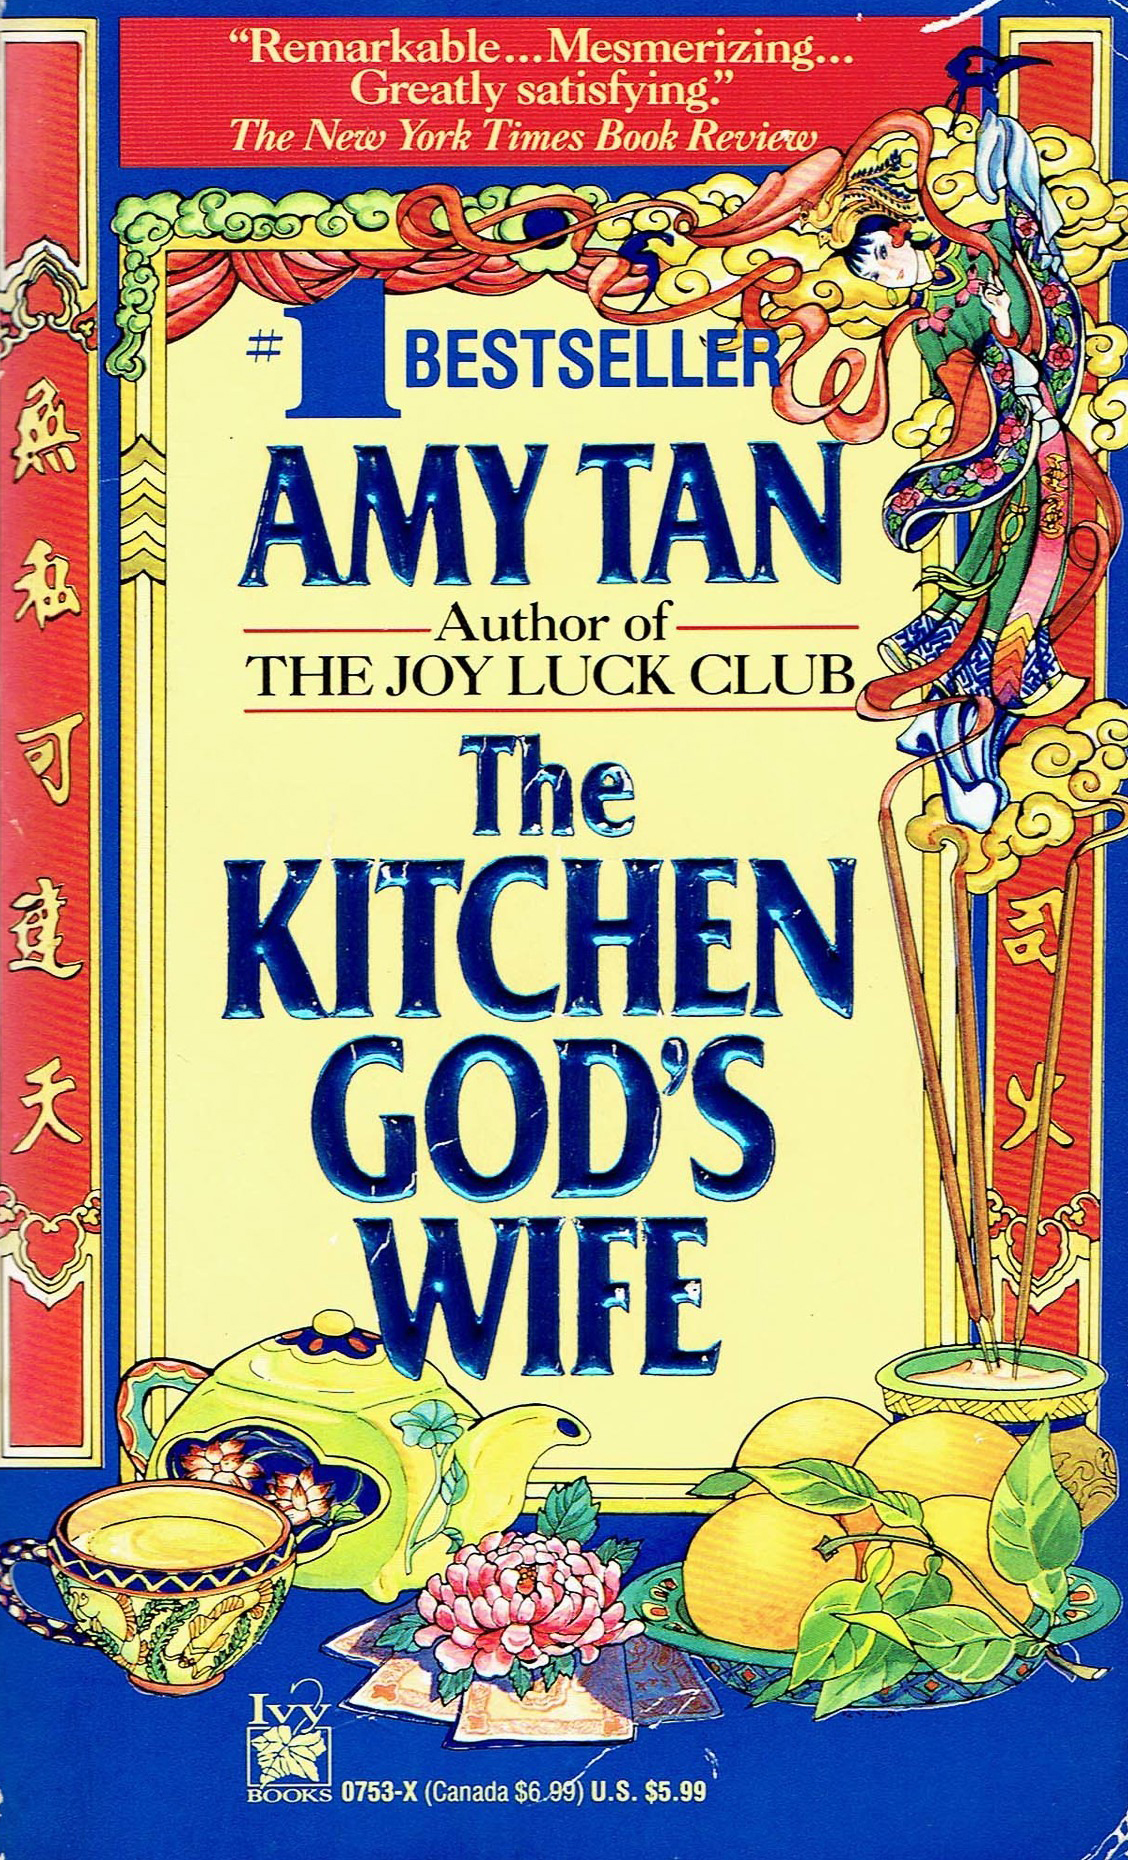 "The Kitchen God's Wife" is the second novel by Chinese-American author Amy Tan. First published in 1992, it deals extensively with Sino-American female identity, and draws on the story of her mother's life.